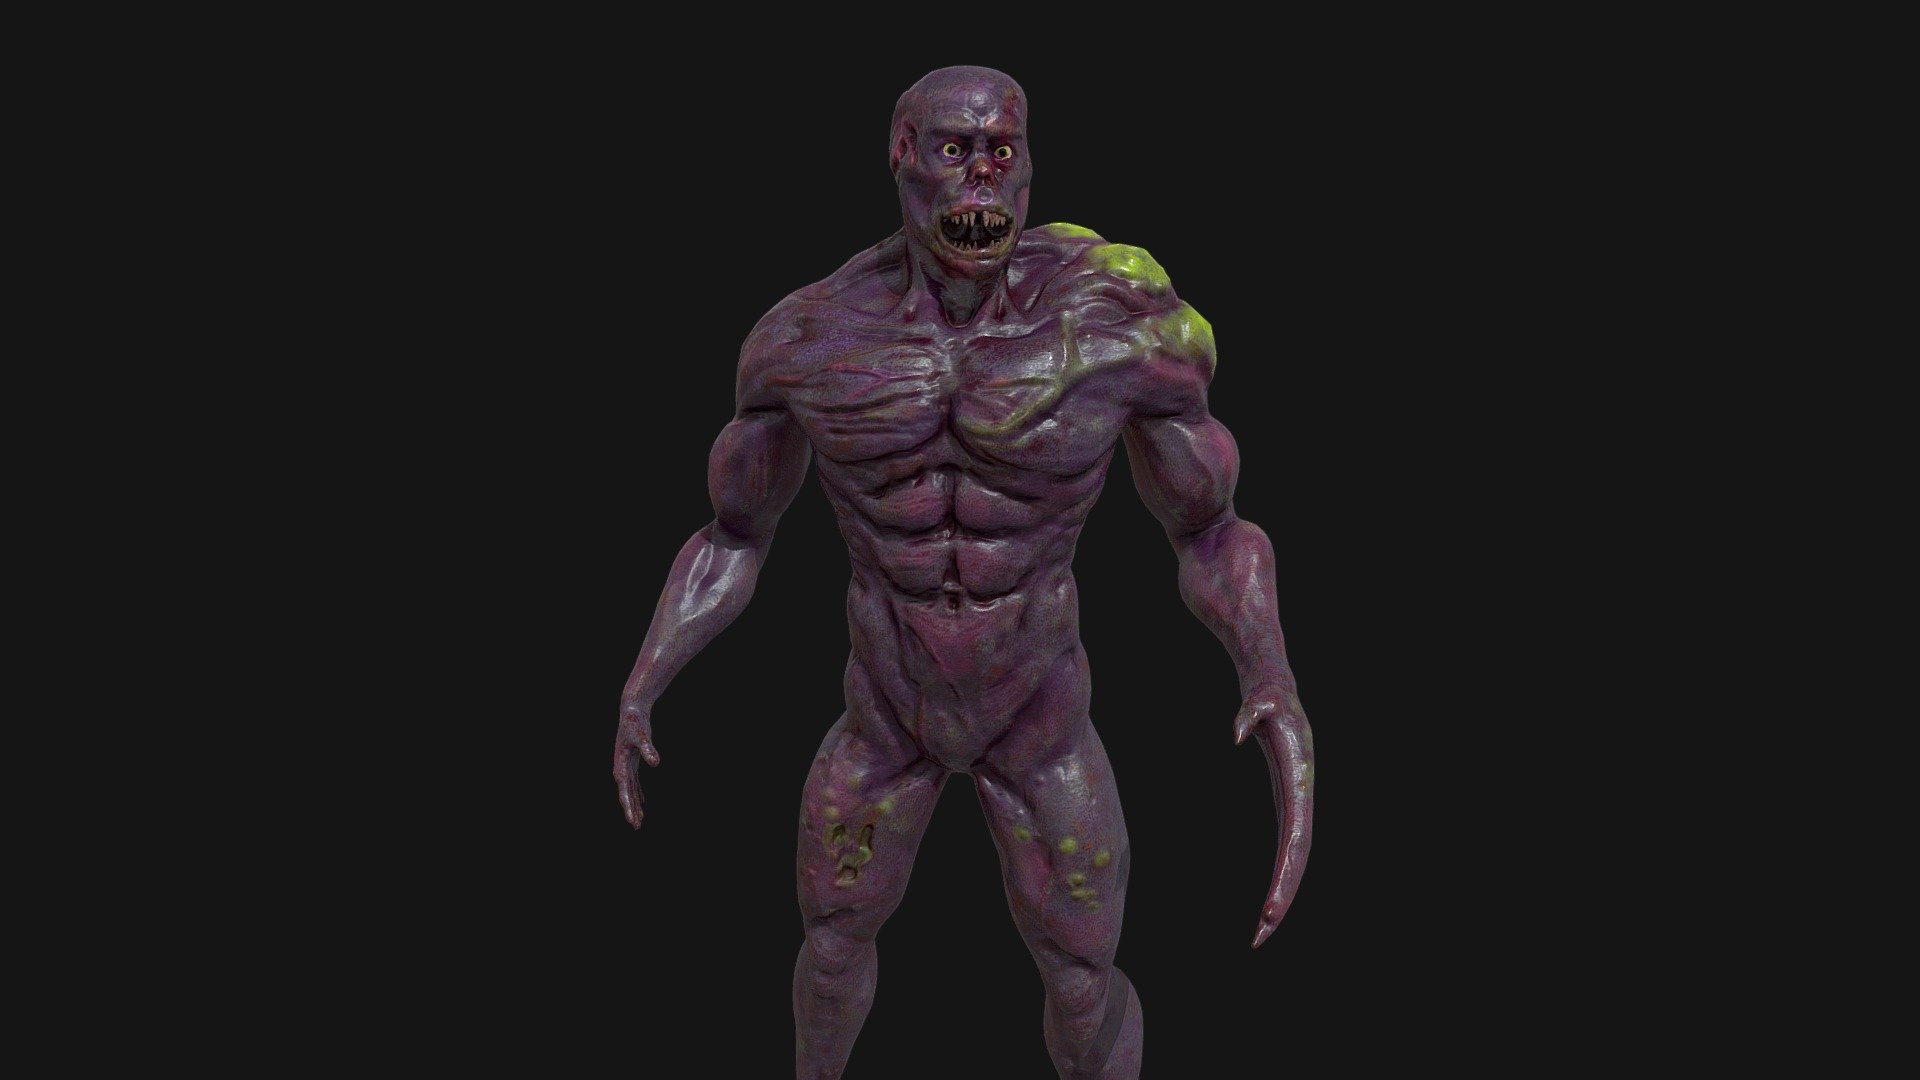 Sci fi zombie mutant monster character